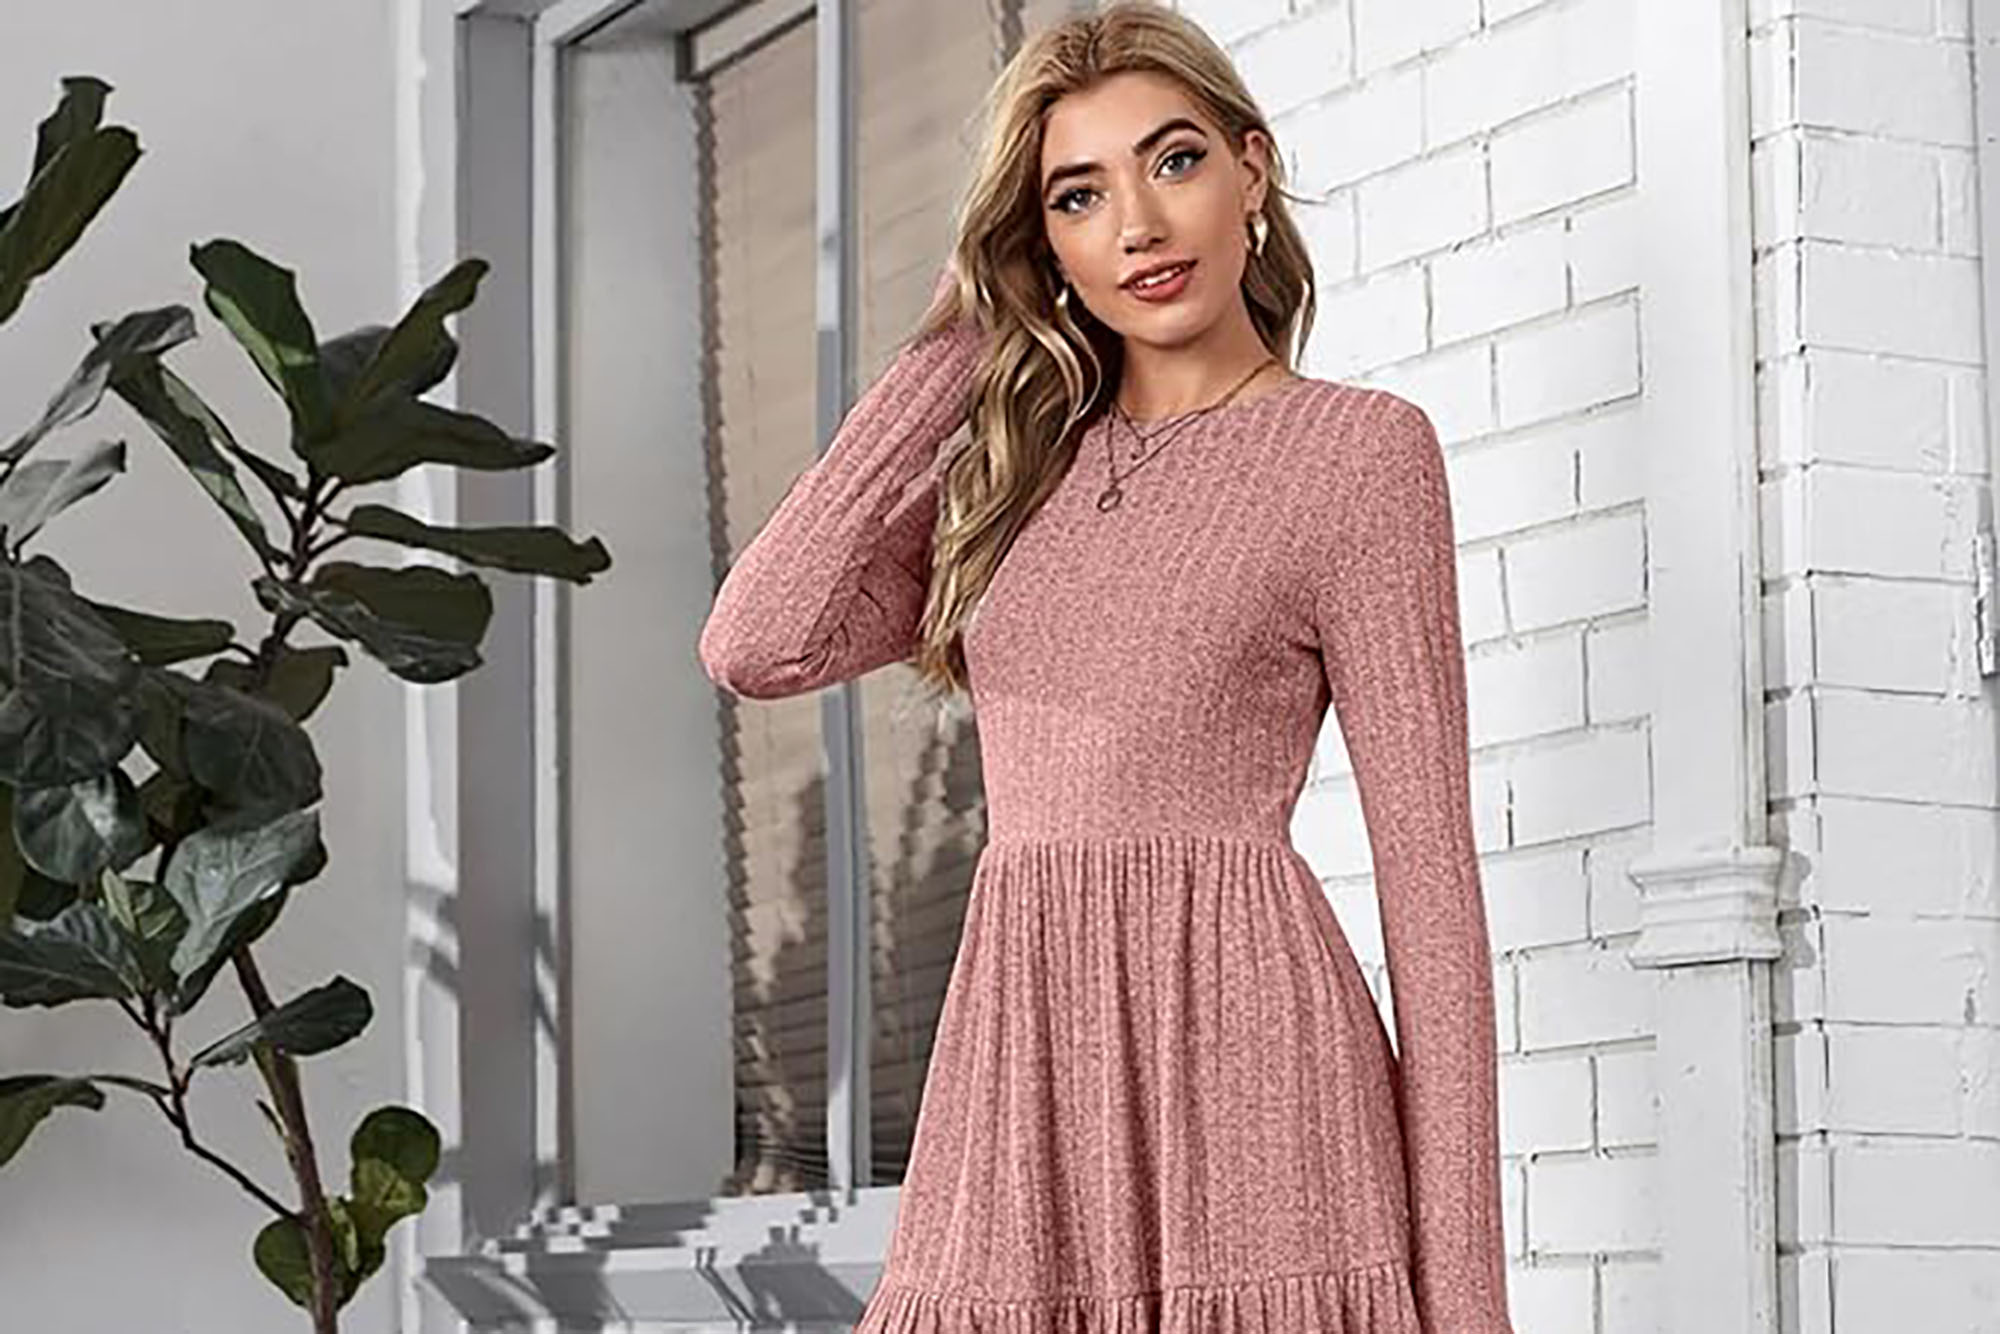 You'll Want to Add These 20 Dresses With Pockets to Your Fall Wardrobe